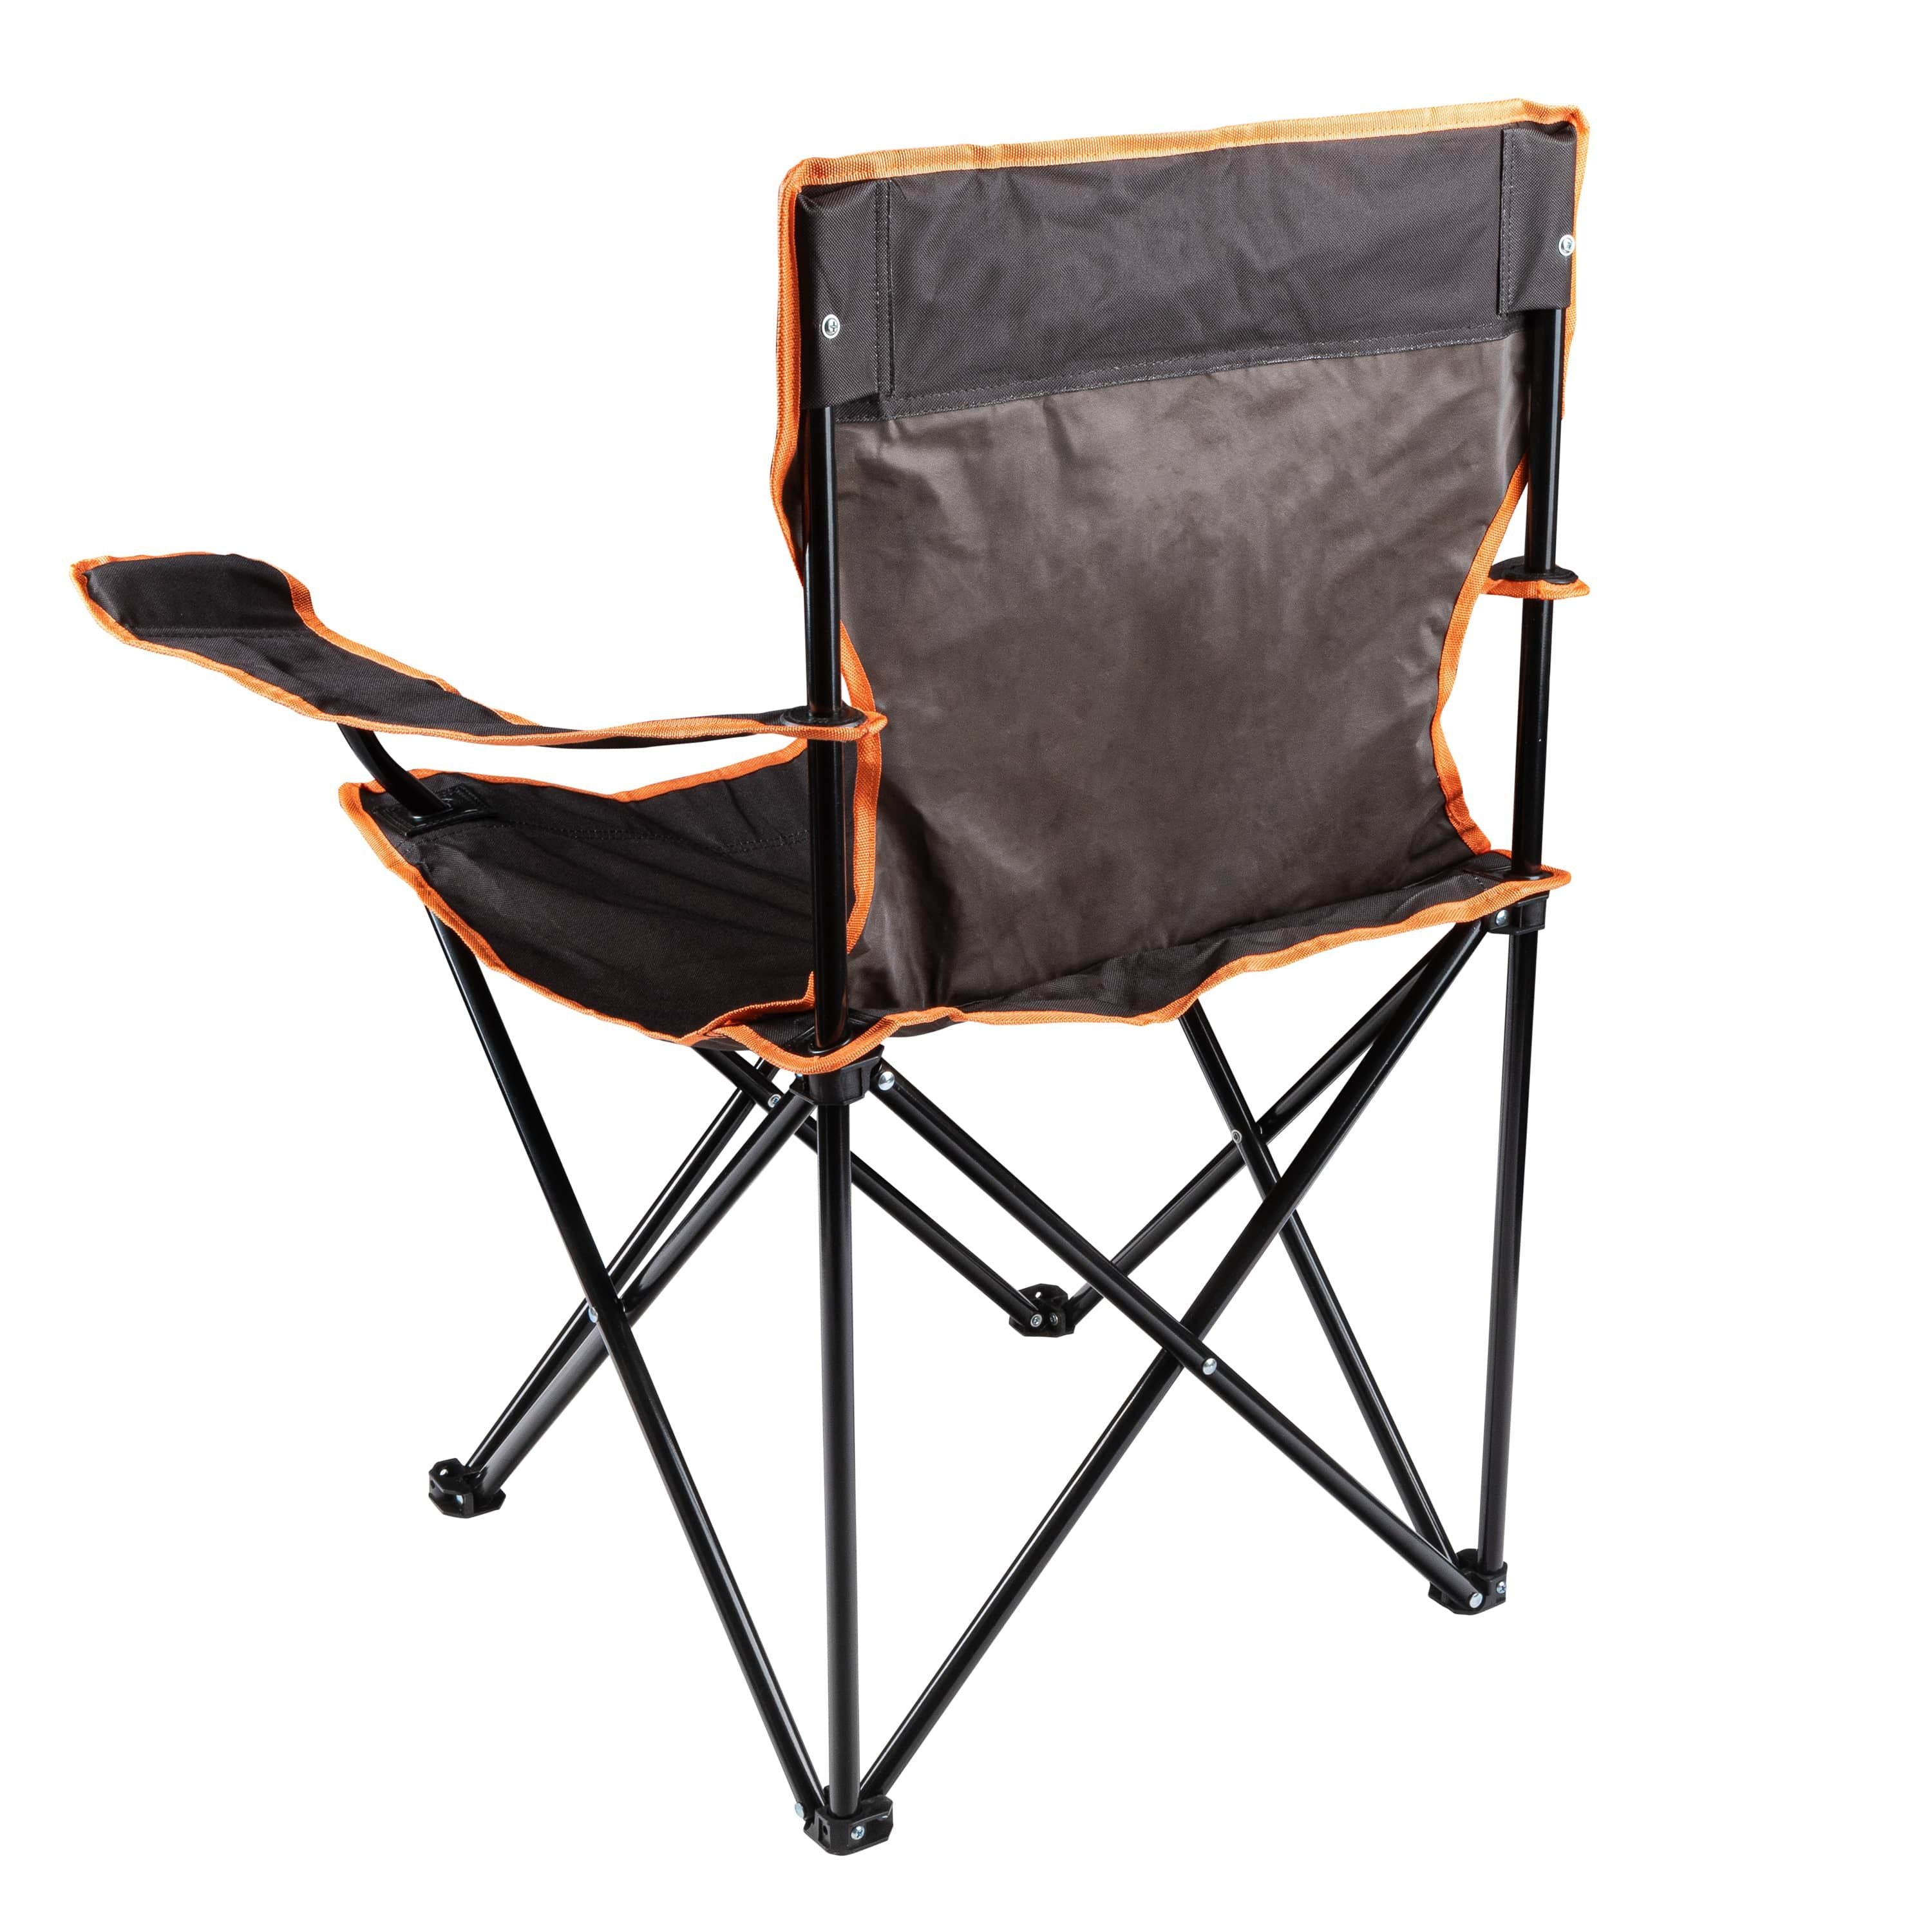 "Day off" Camping chair